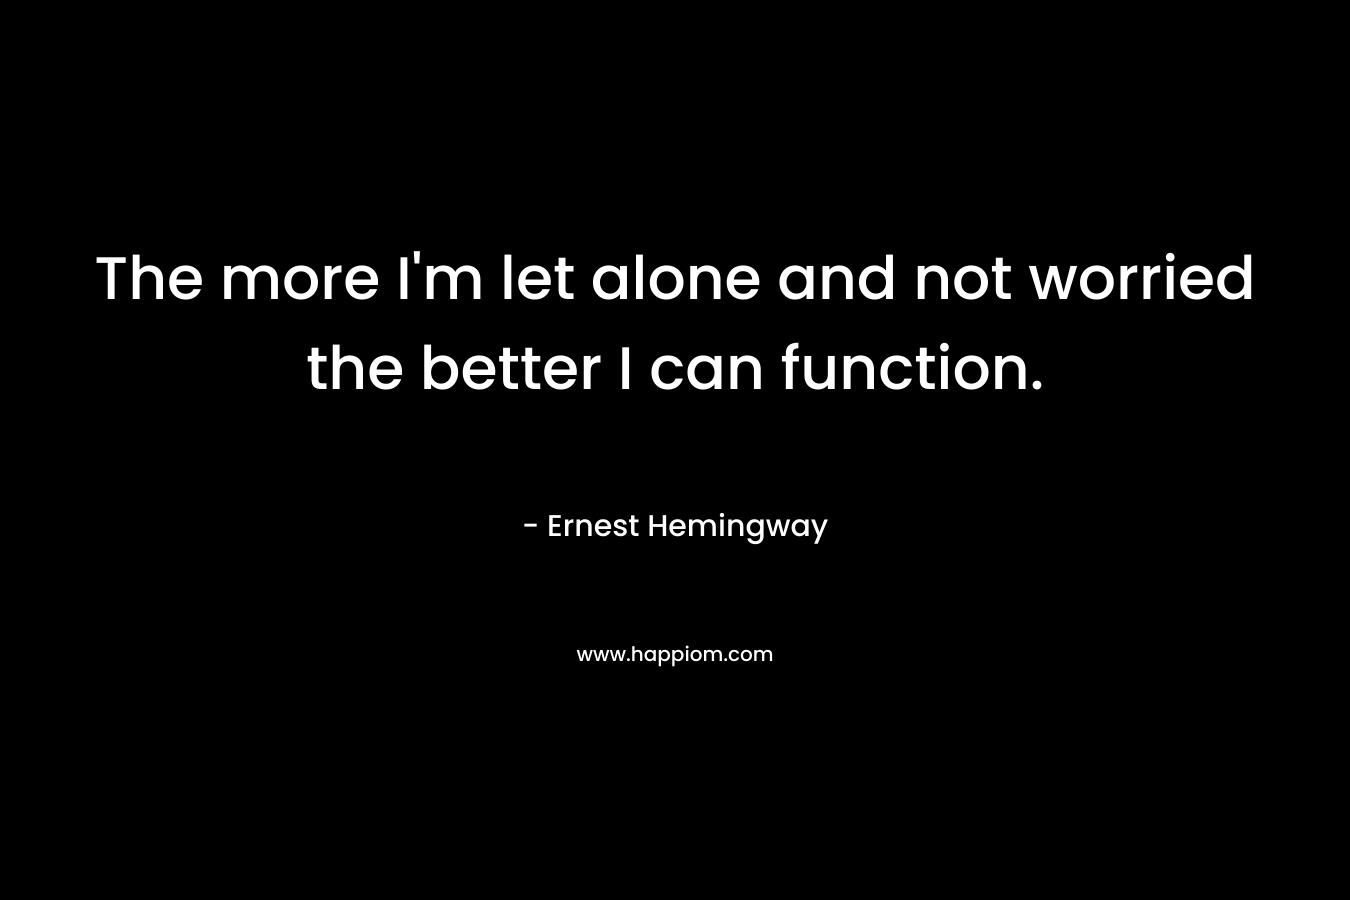 The more I’m let alone and not worried the better I can function. – Ernest Hemingway